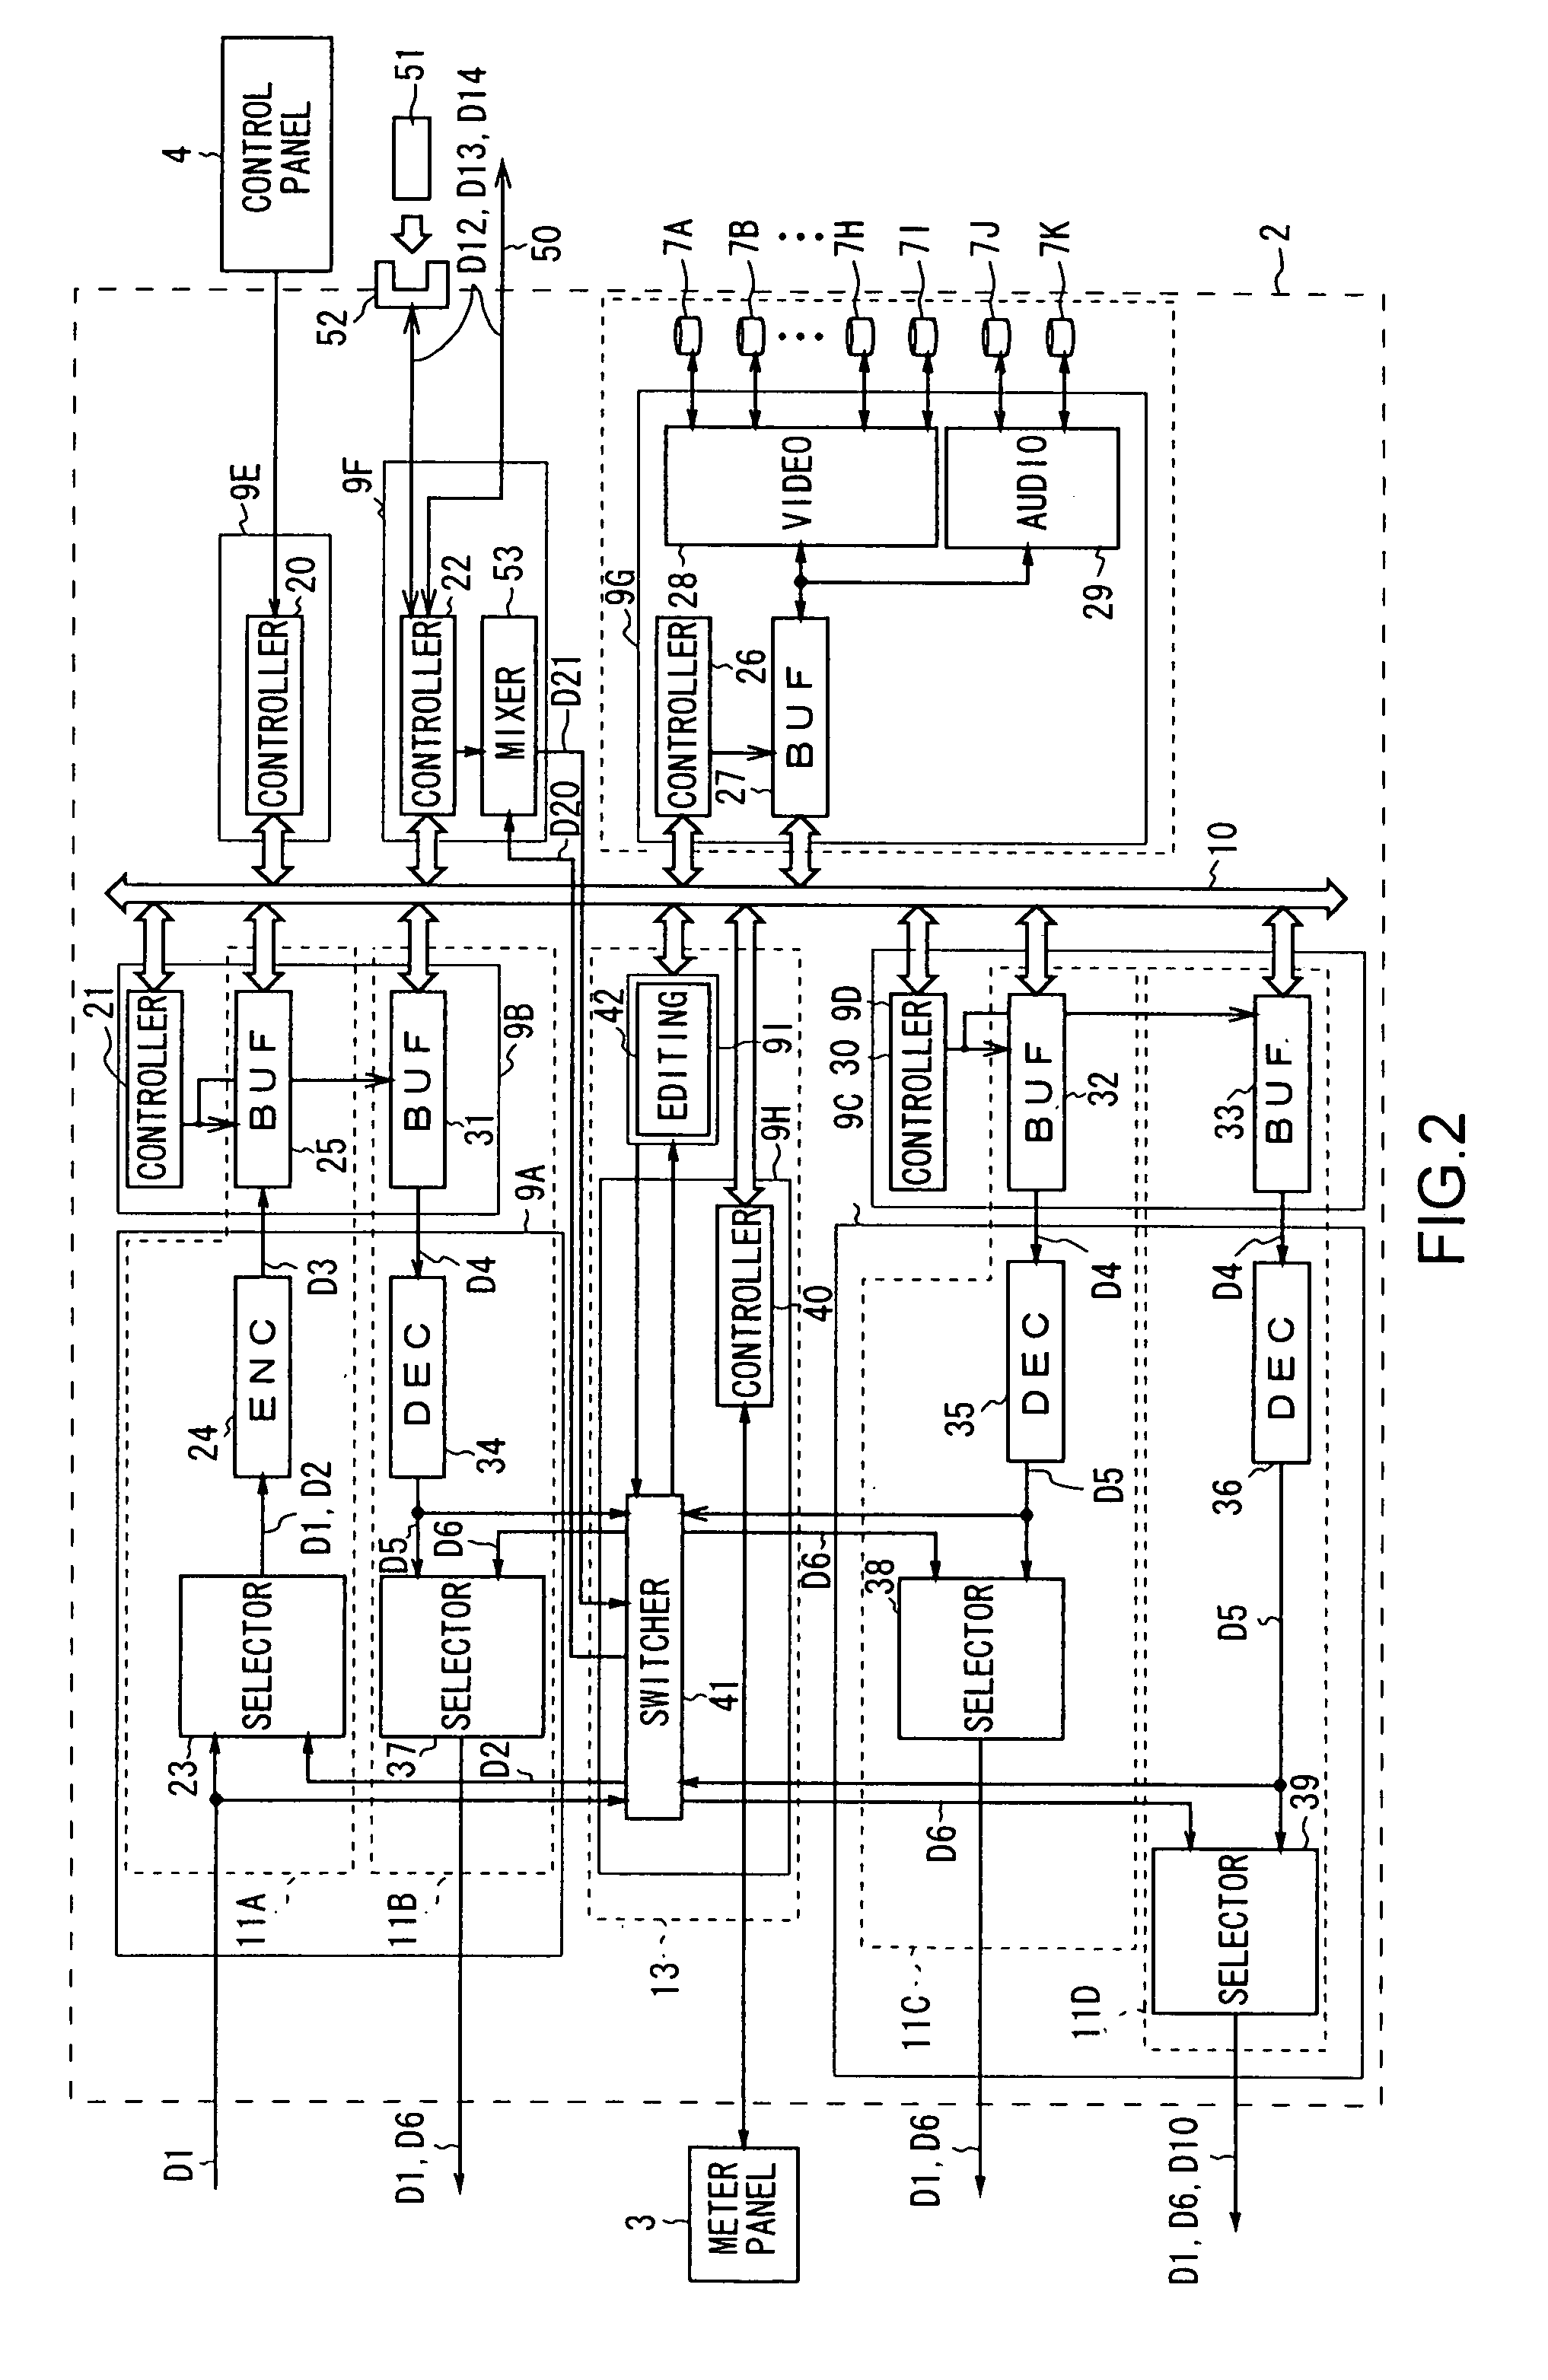 Data recorder-reproducer and bit map data processing method, control program processing method and setting data processing method of data recorder-reproducer